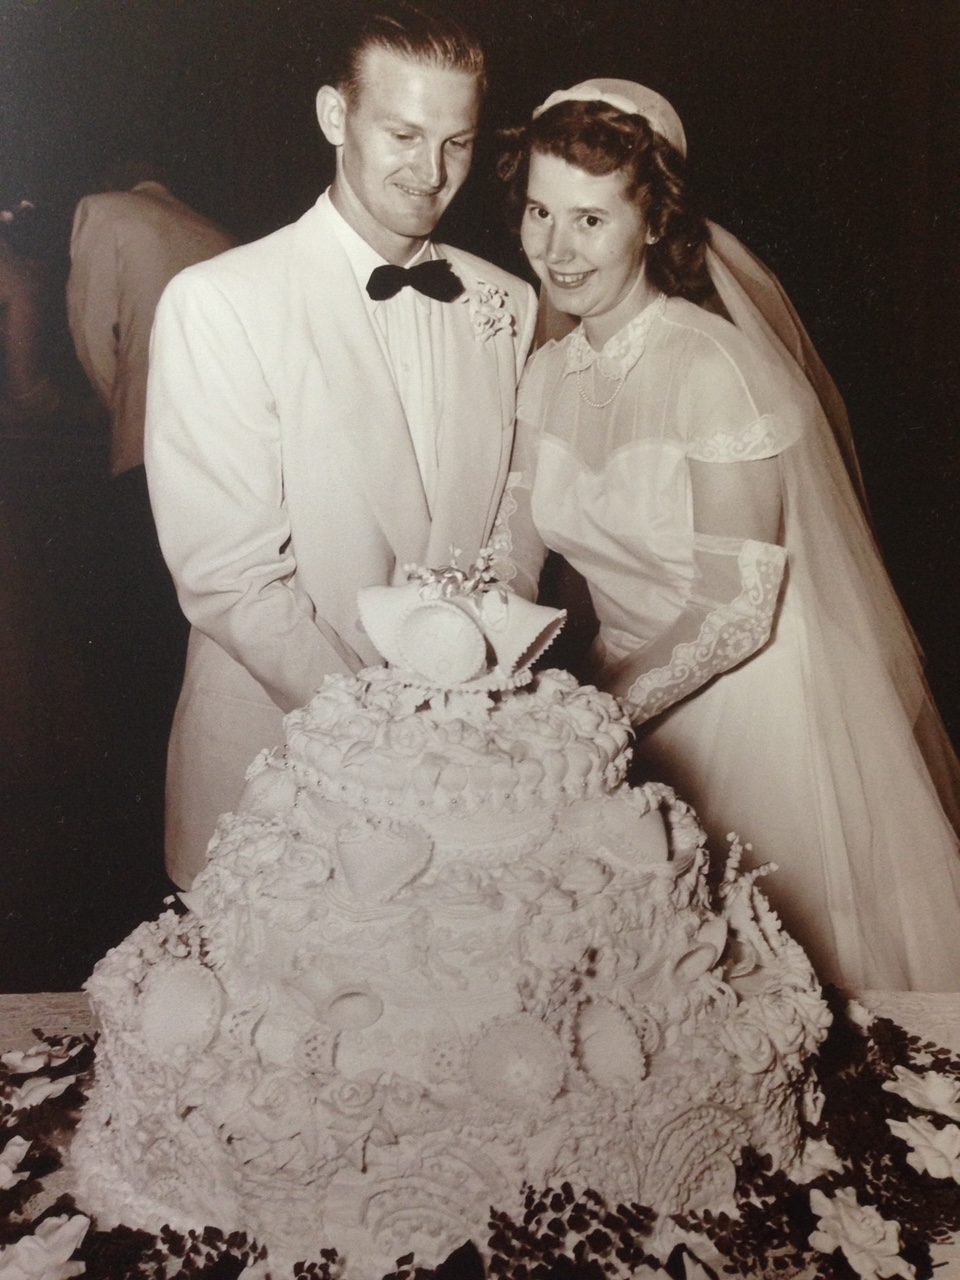 Frank and Norma Hadley celebrated their 70th wedding anniversary recently at a special morning tea with family and friends. The Hadleys were married on July 22,1950 in Merced, California. The couple are pictured here with their magnificent wedding cake.